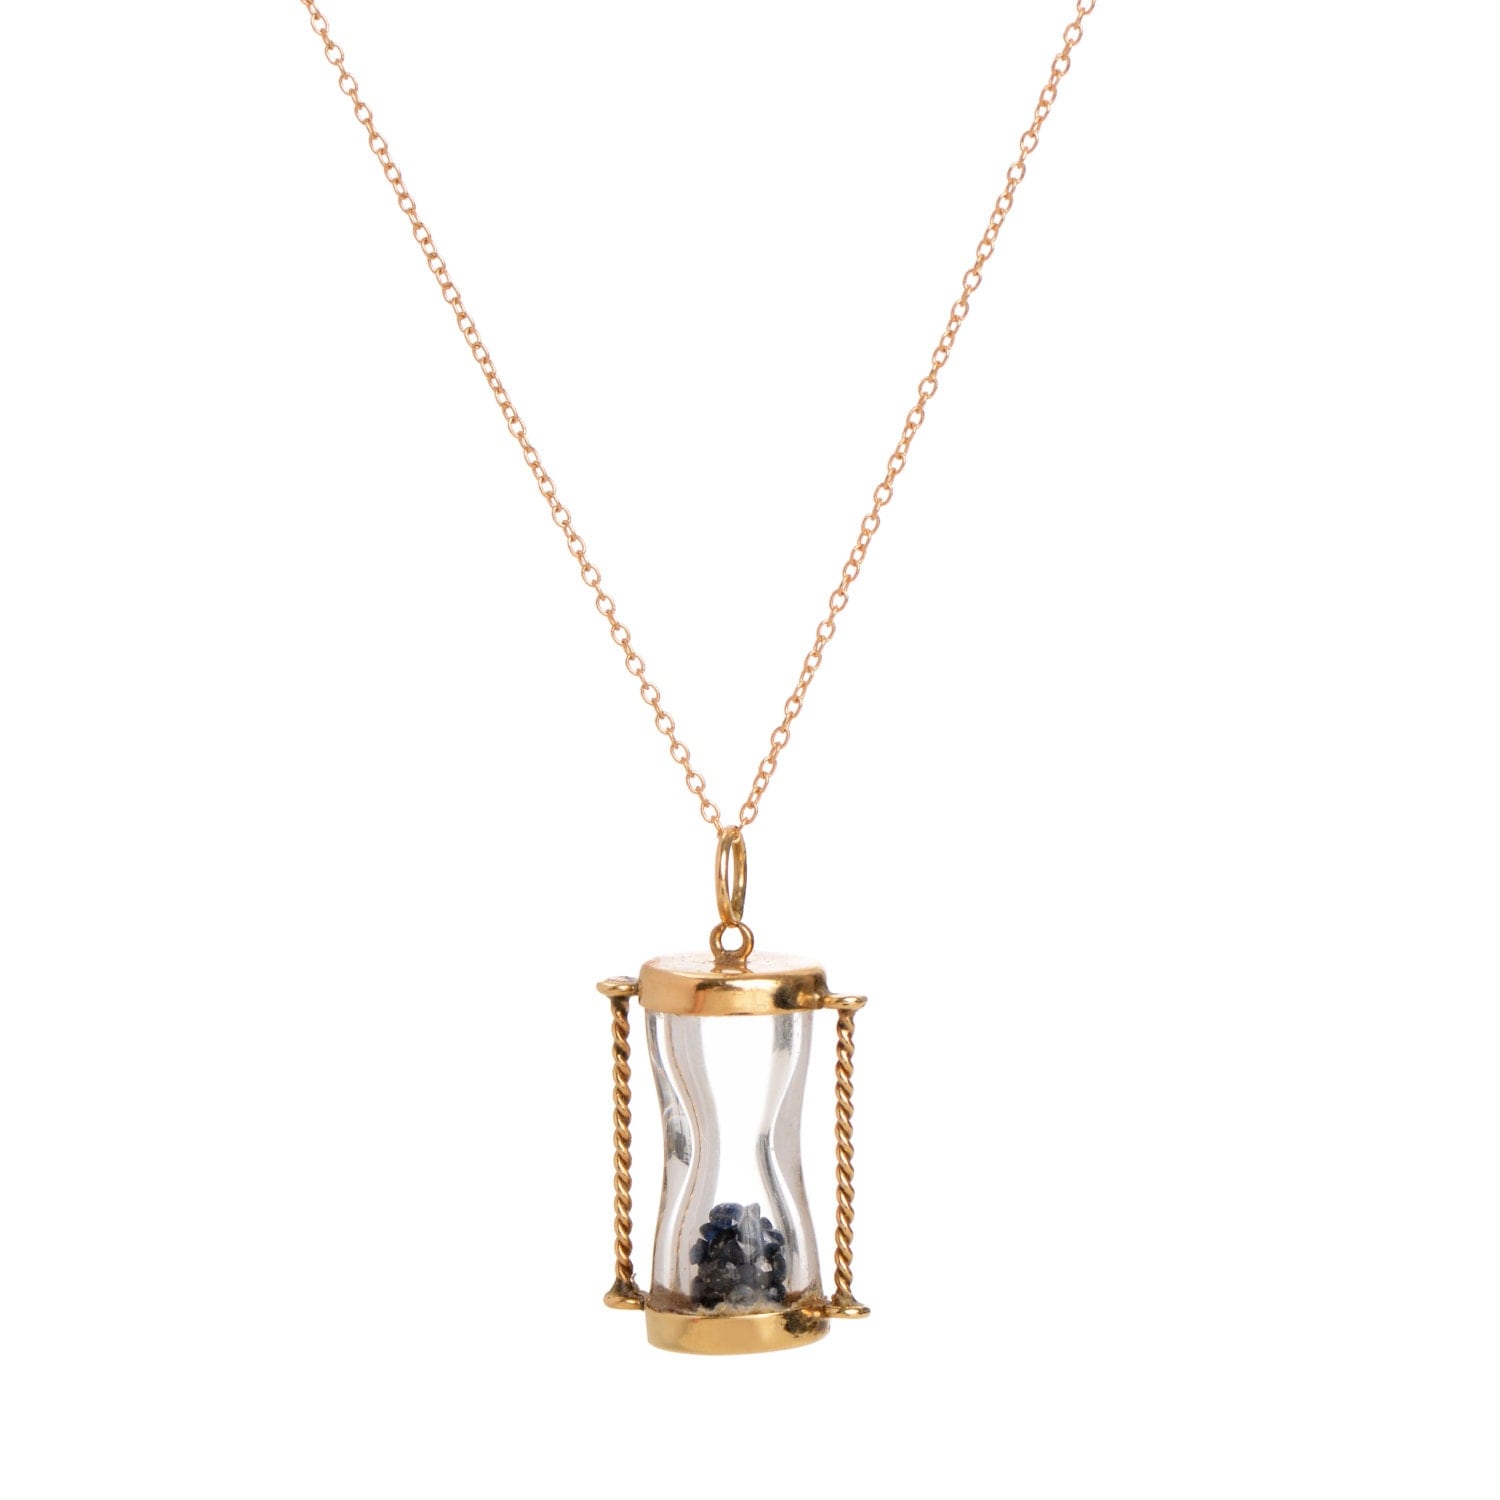 Incredible Vintage 14k Gold Sapphire Hourglass Pendant